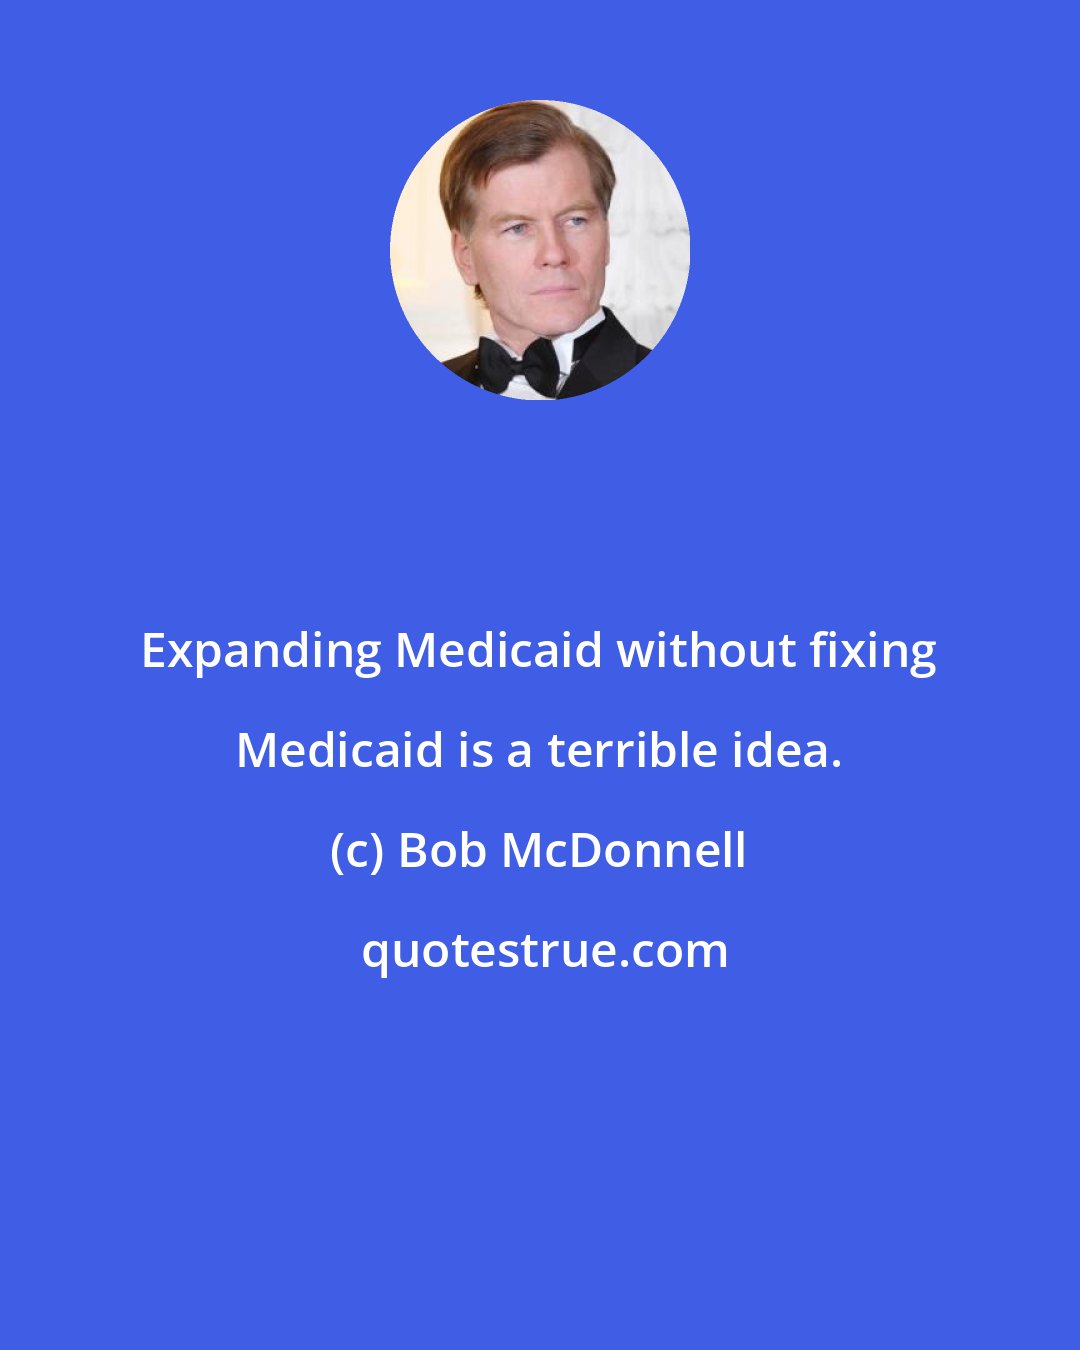 Bob McDonnell: Expanding Medicaid without fixing Medicaid is a terrible idea.